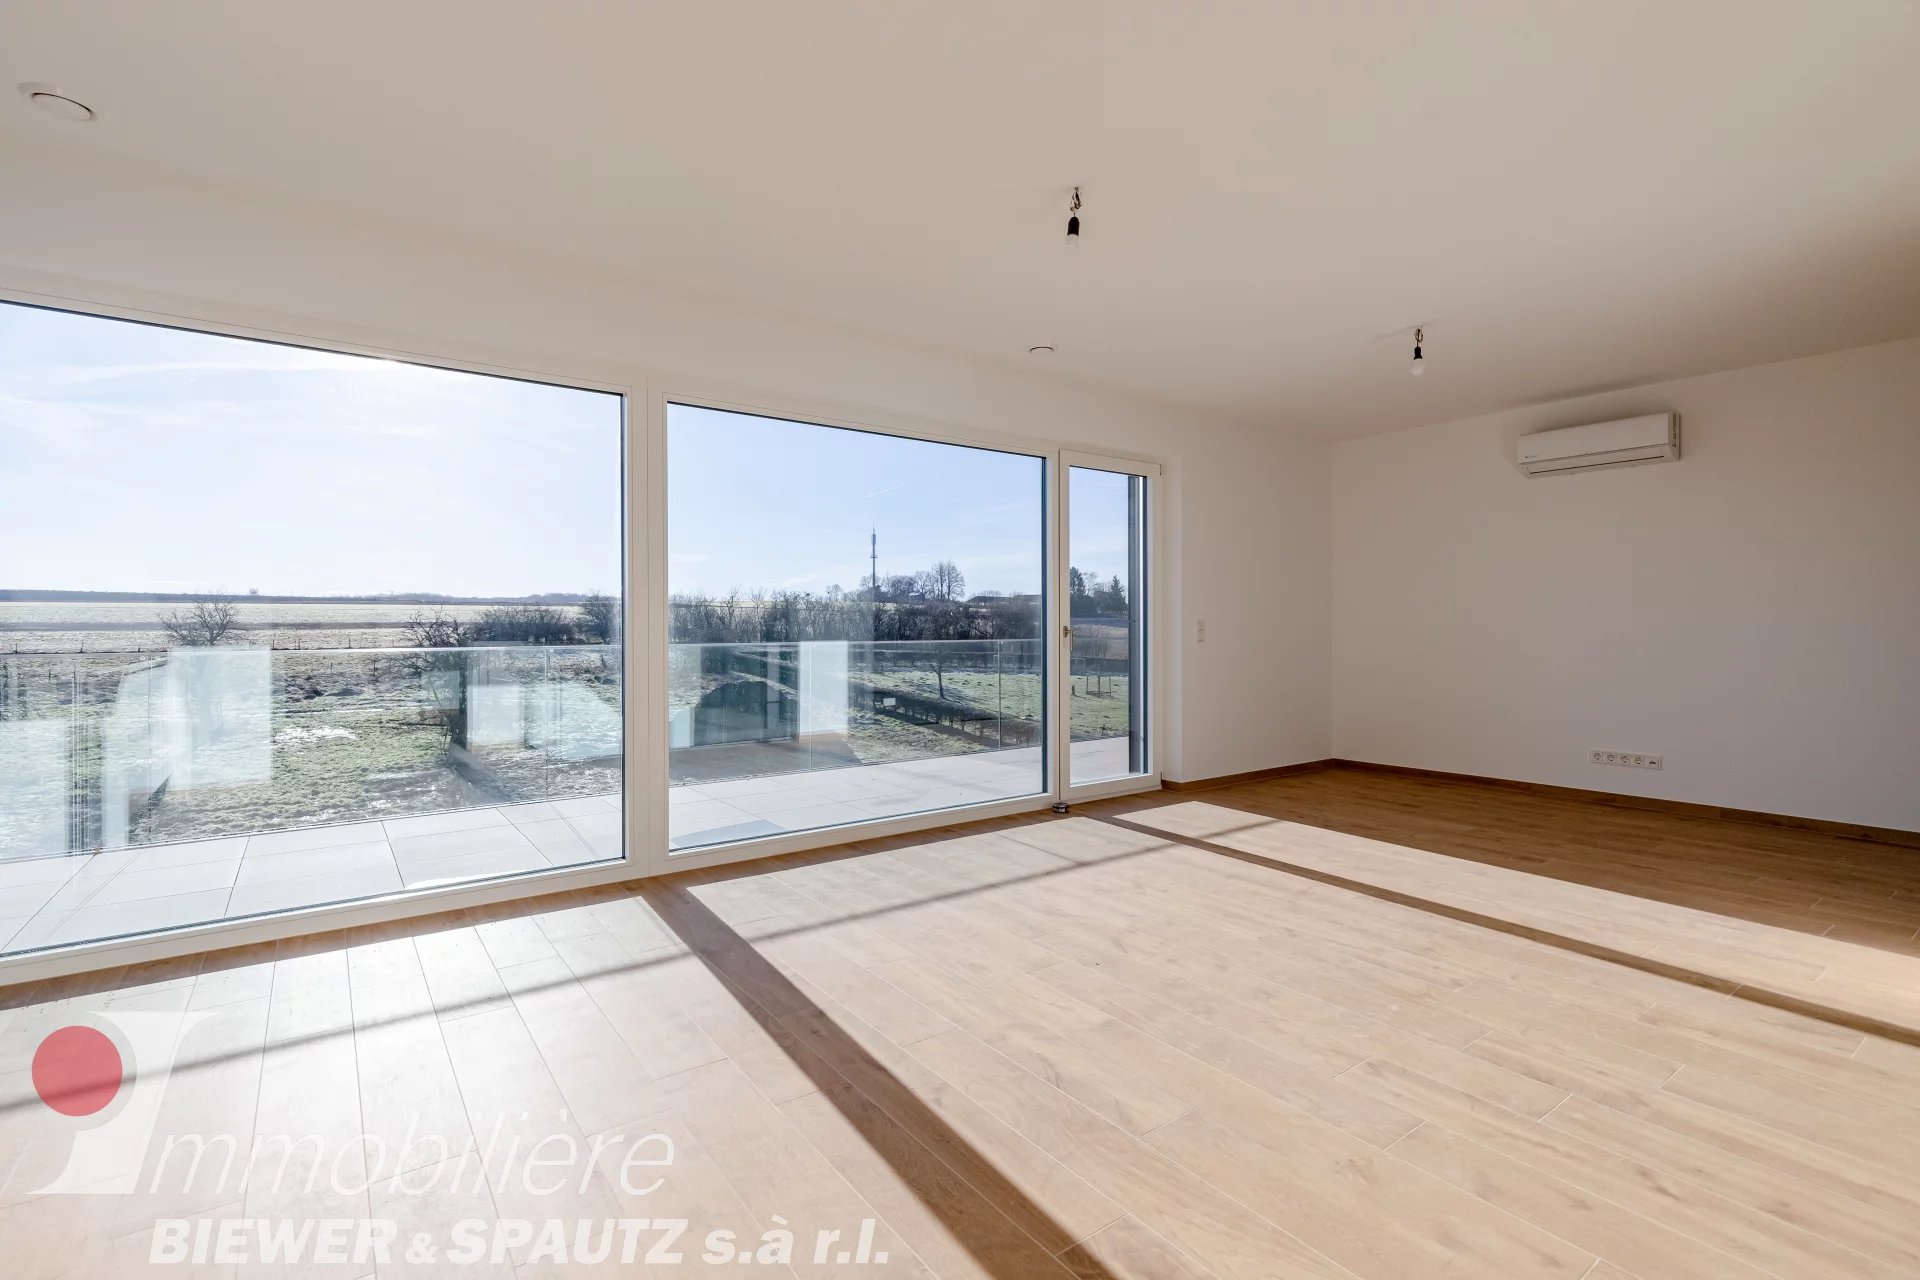 Your New Home in a Luxury Duplex: Elegance & View in Junglinster